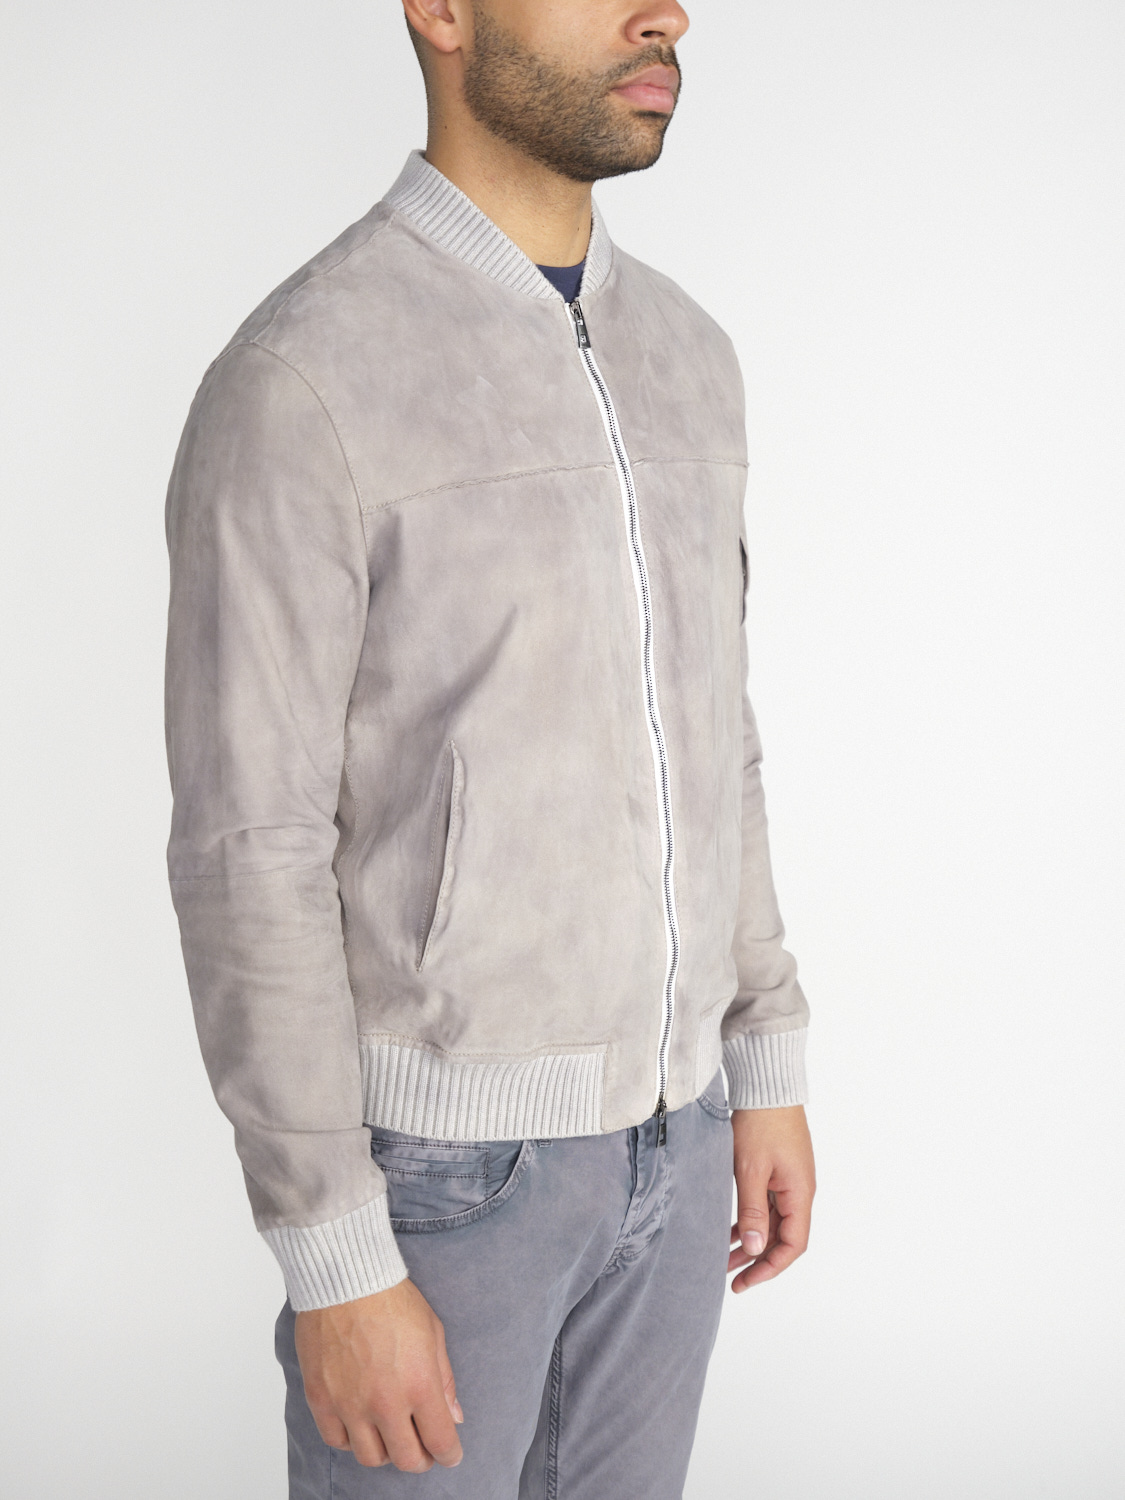 GMS 75 Bomber leather jacket with zipper  grey M